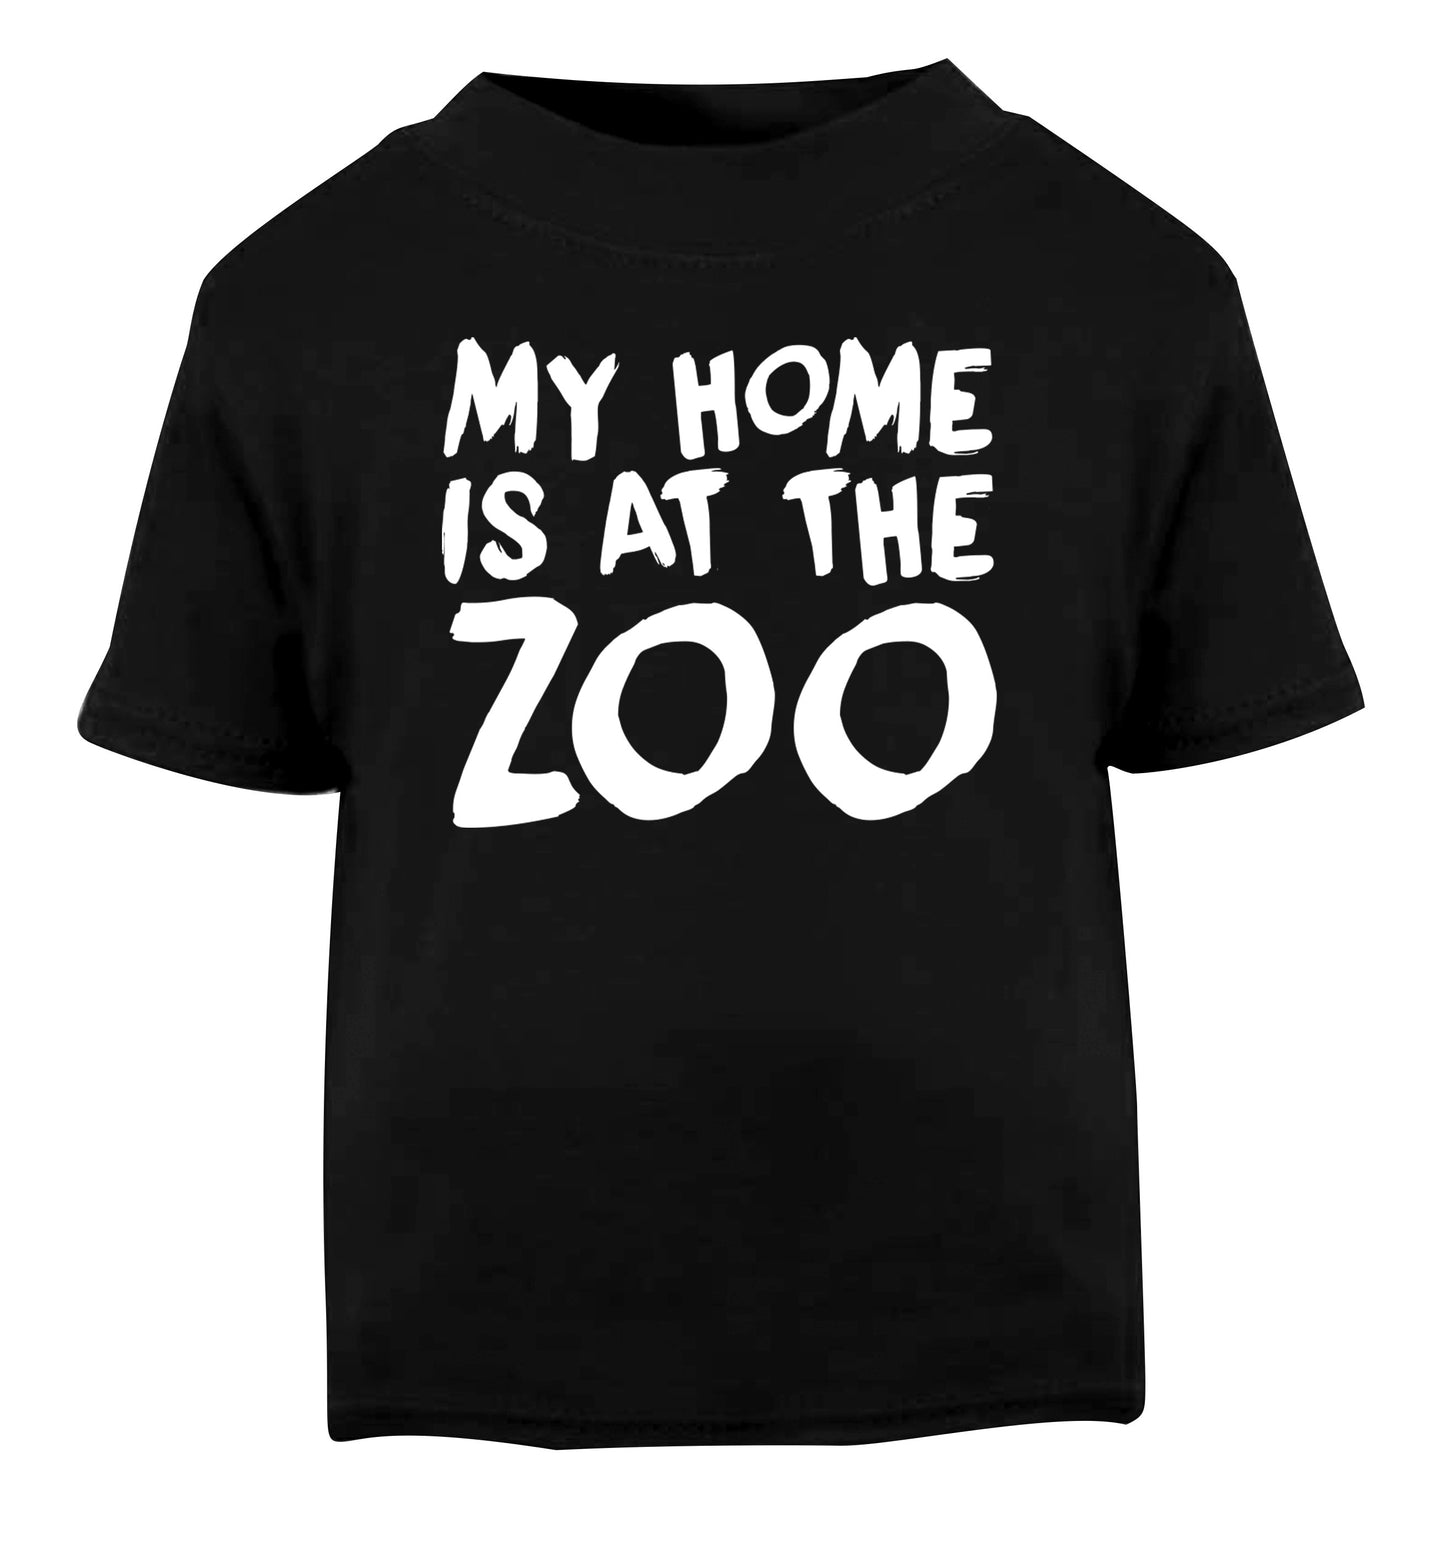 My home is at the zoo Black Baby Toddler Tshirt 2 years